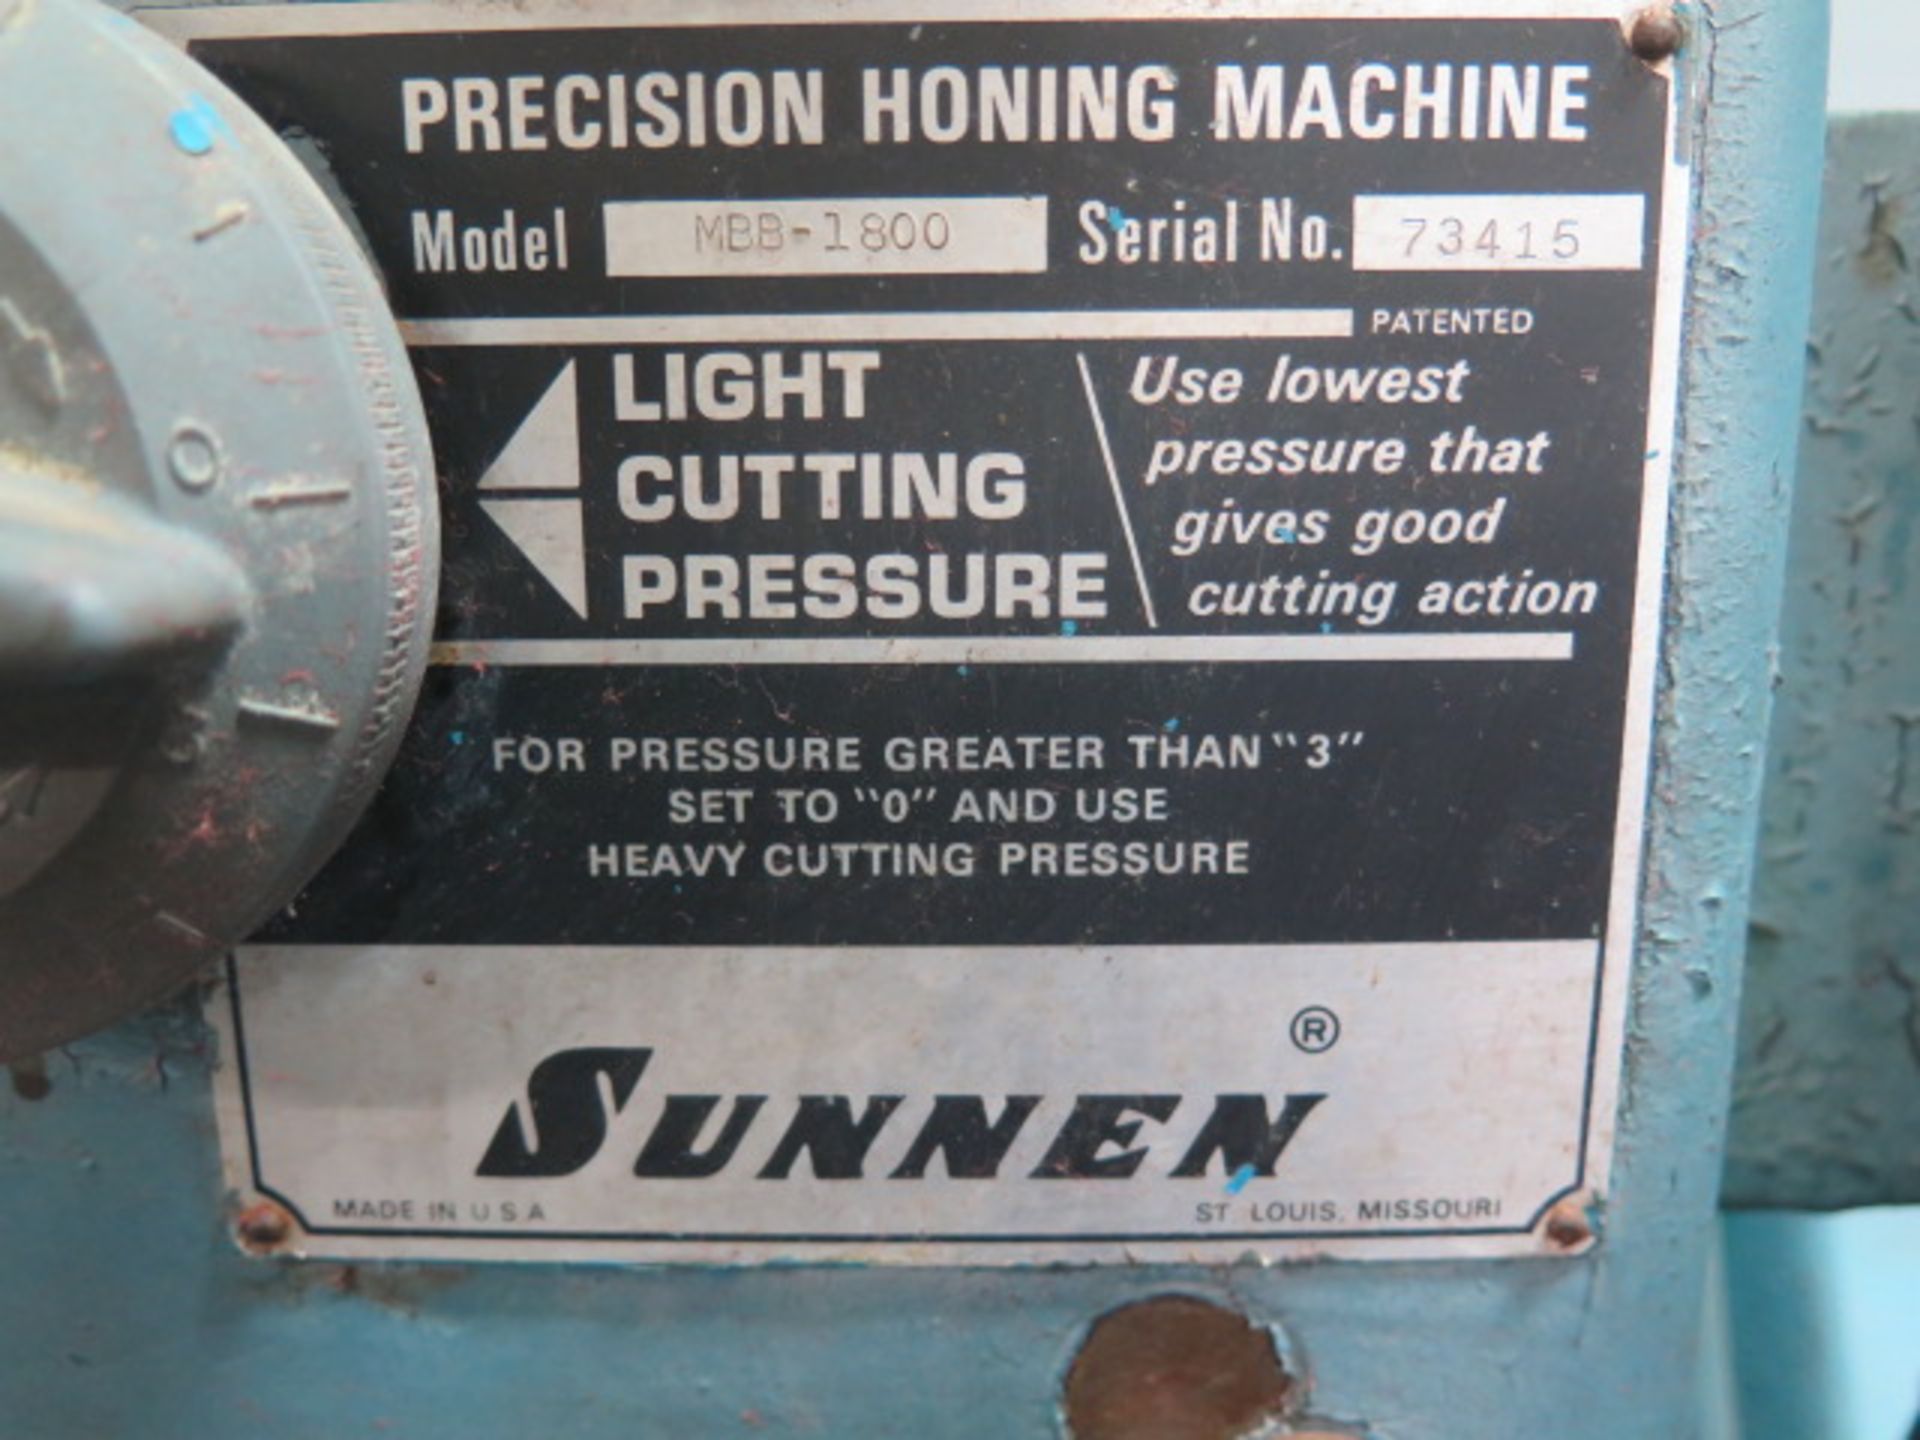 Sunnen mdl. MBB-1800 Automatic Precision Honing Machine s/n 73415 w/ Power Stroke Unit, 12-Speeds, - Image 8 of 8